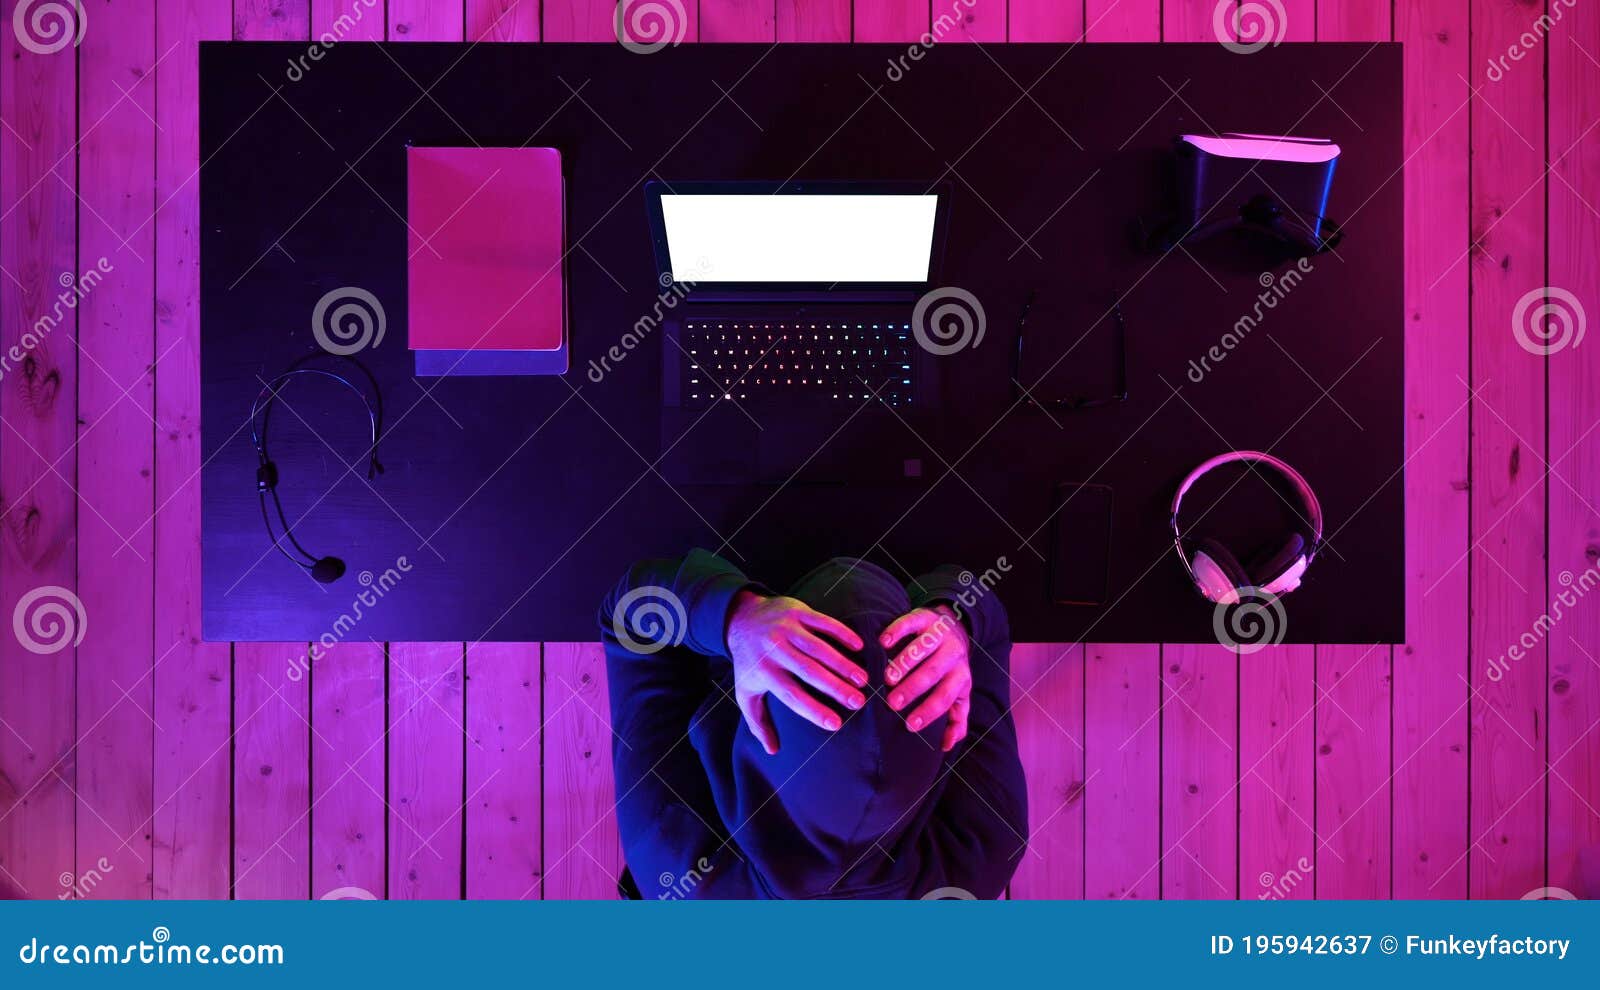 Sad Gamer Sits At Home Behind The Computer And Cries Of Defeat In The